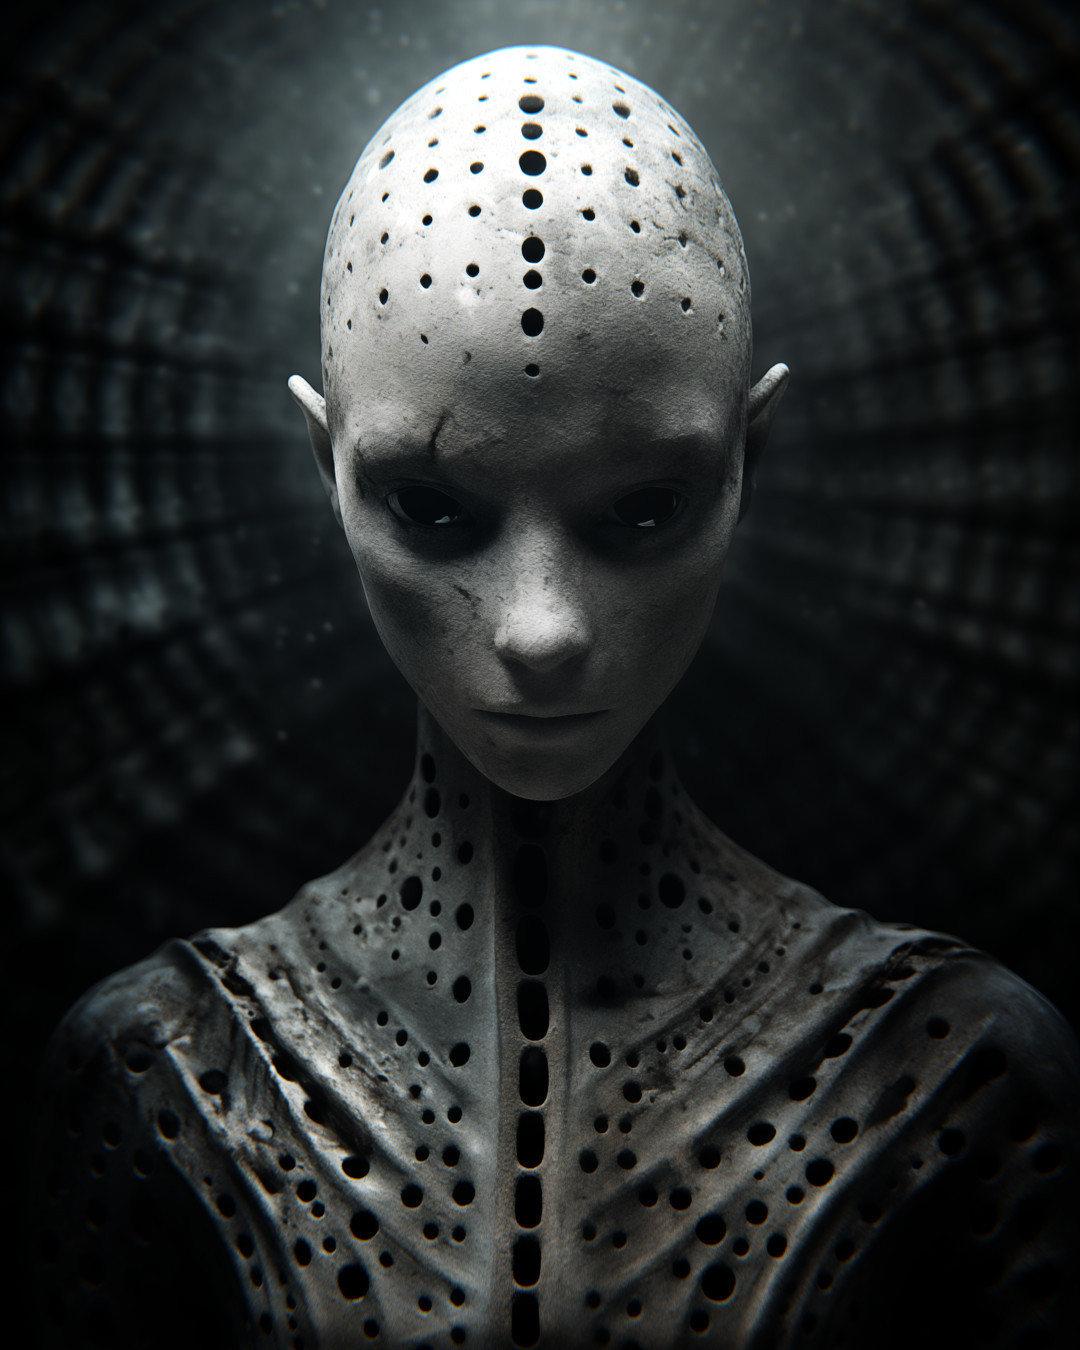 Alien woman, dressed in metal with holes, silver and black